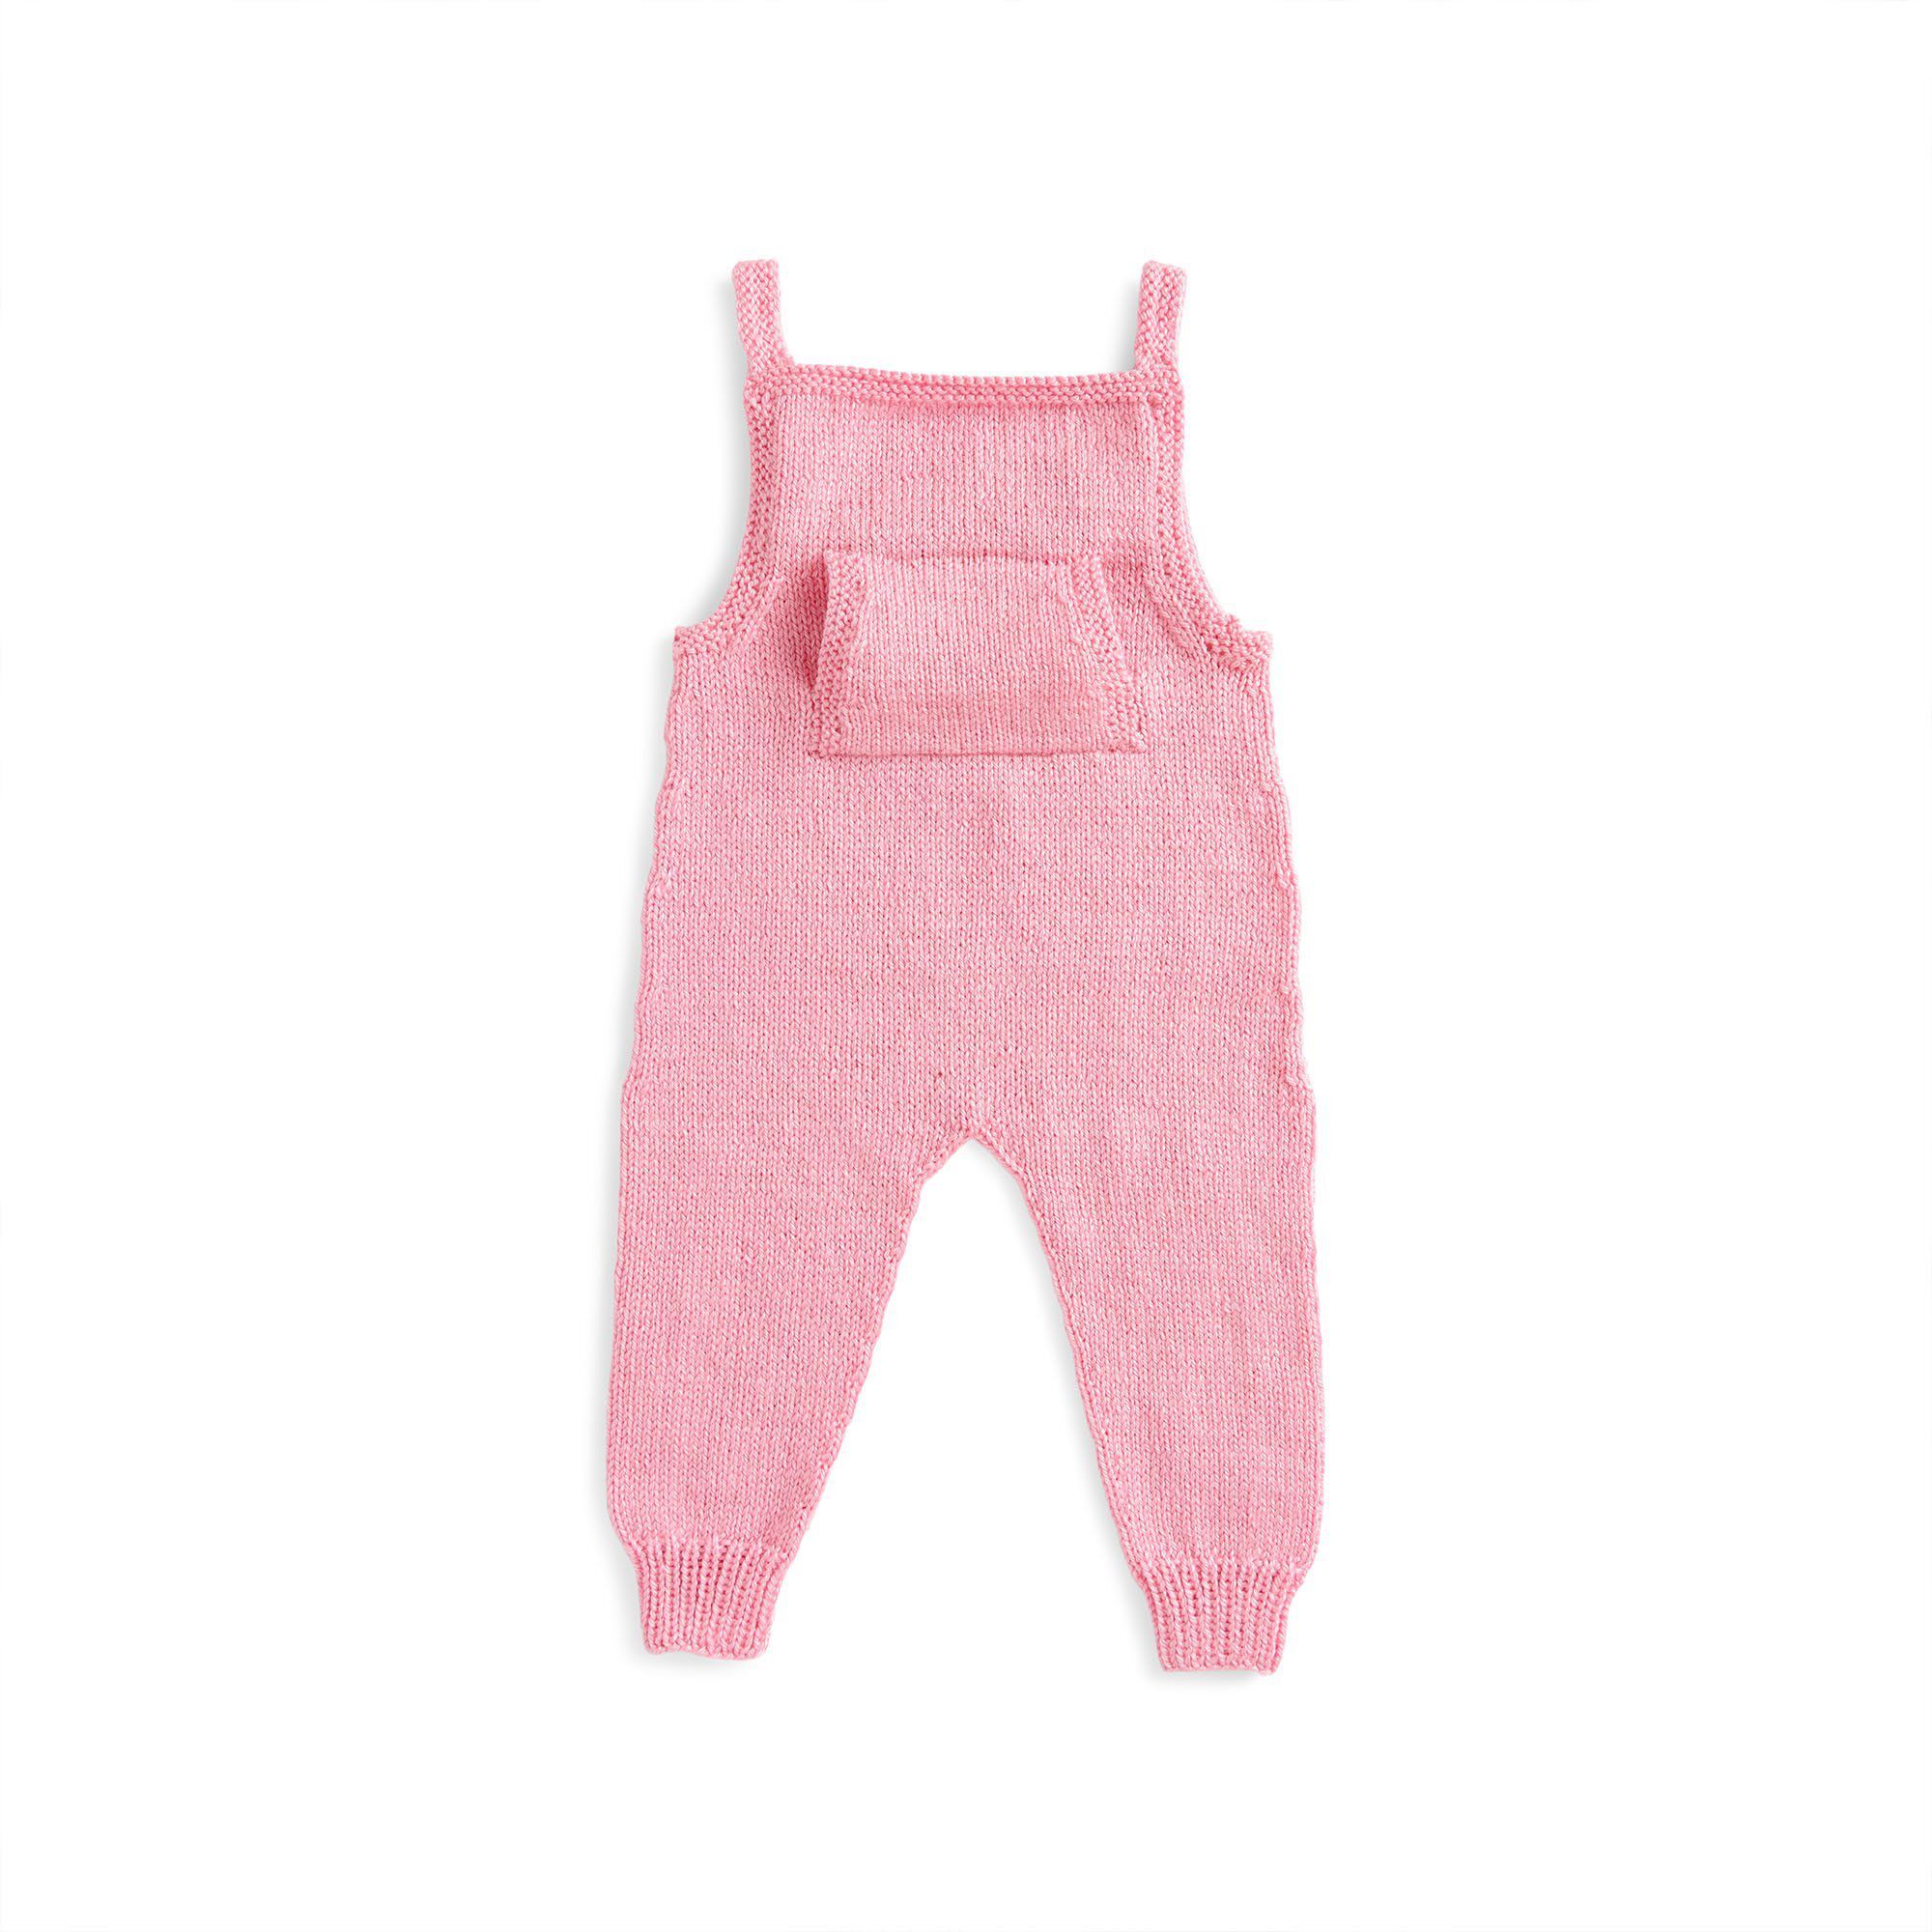 Knitting Patterns Galore - Baby Overalls